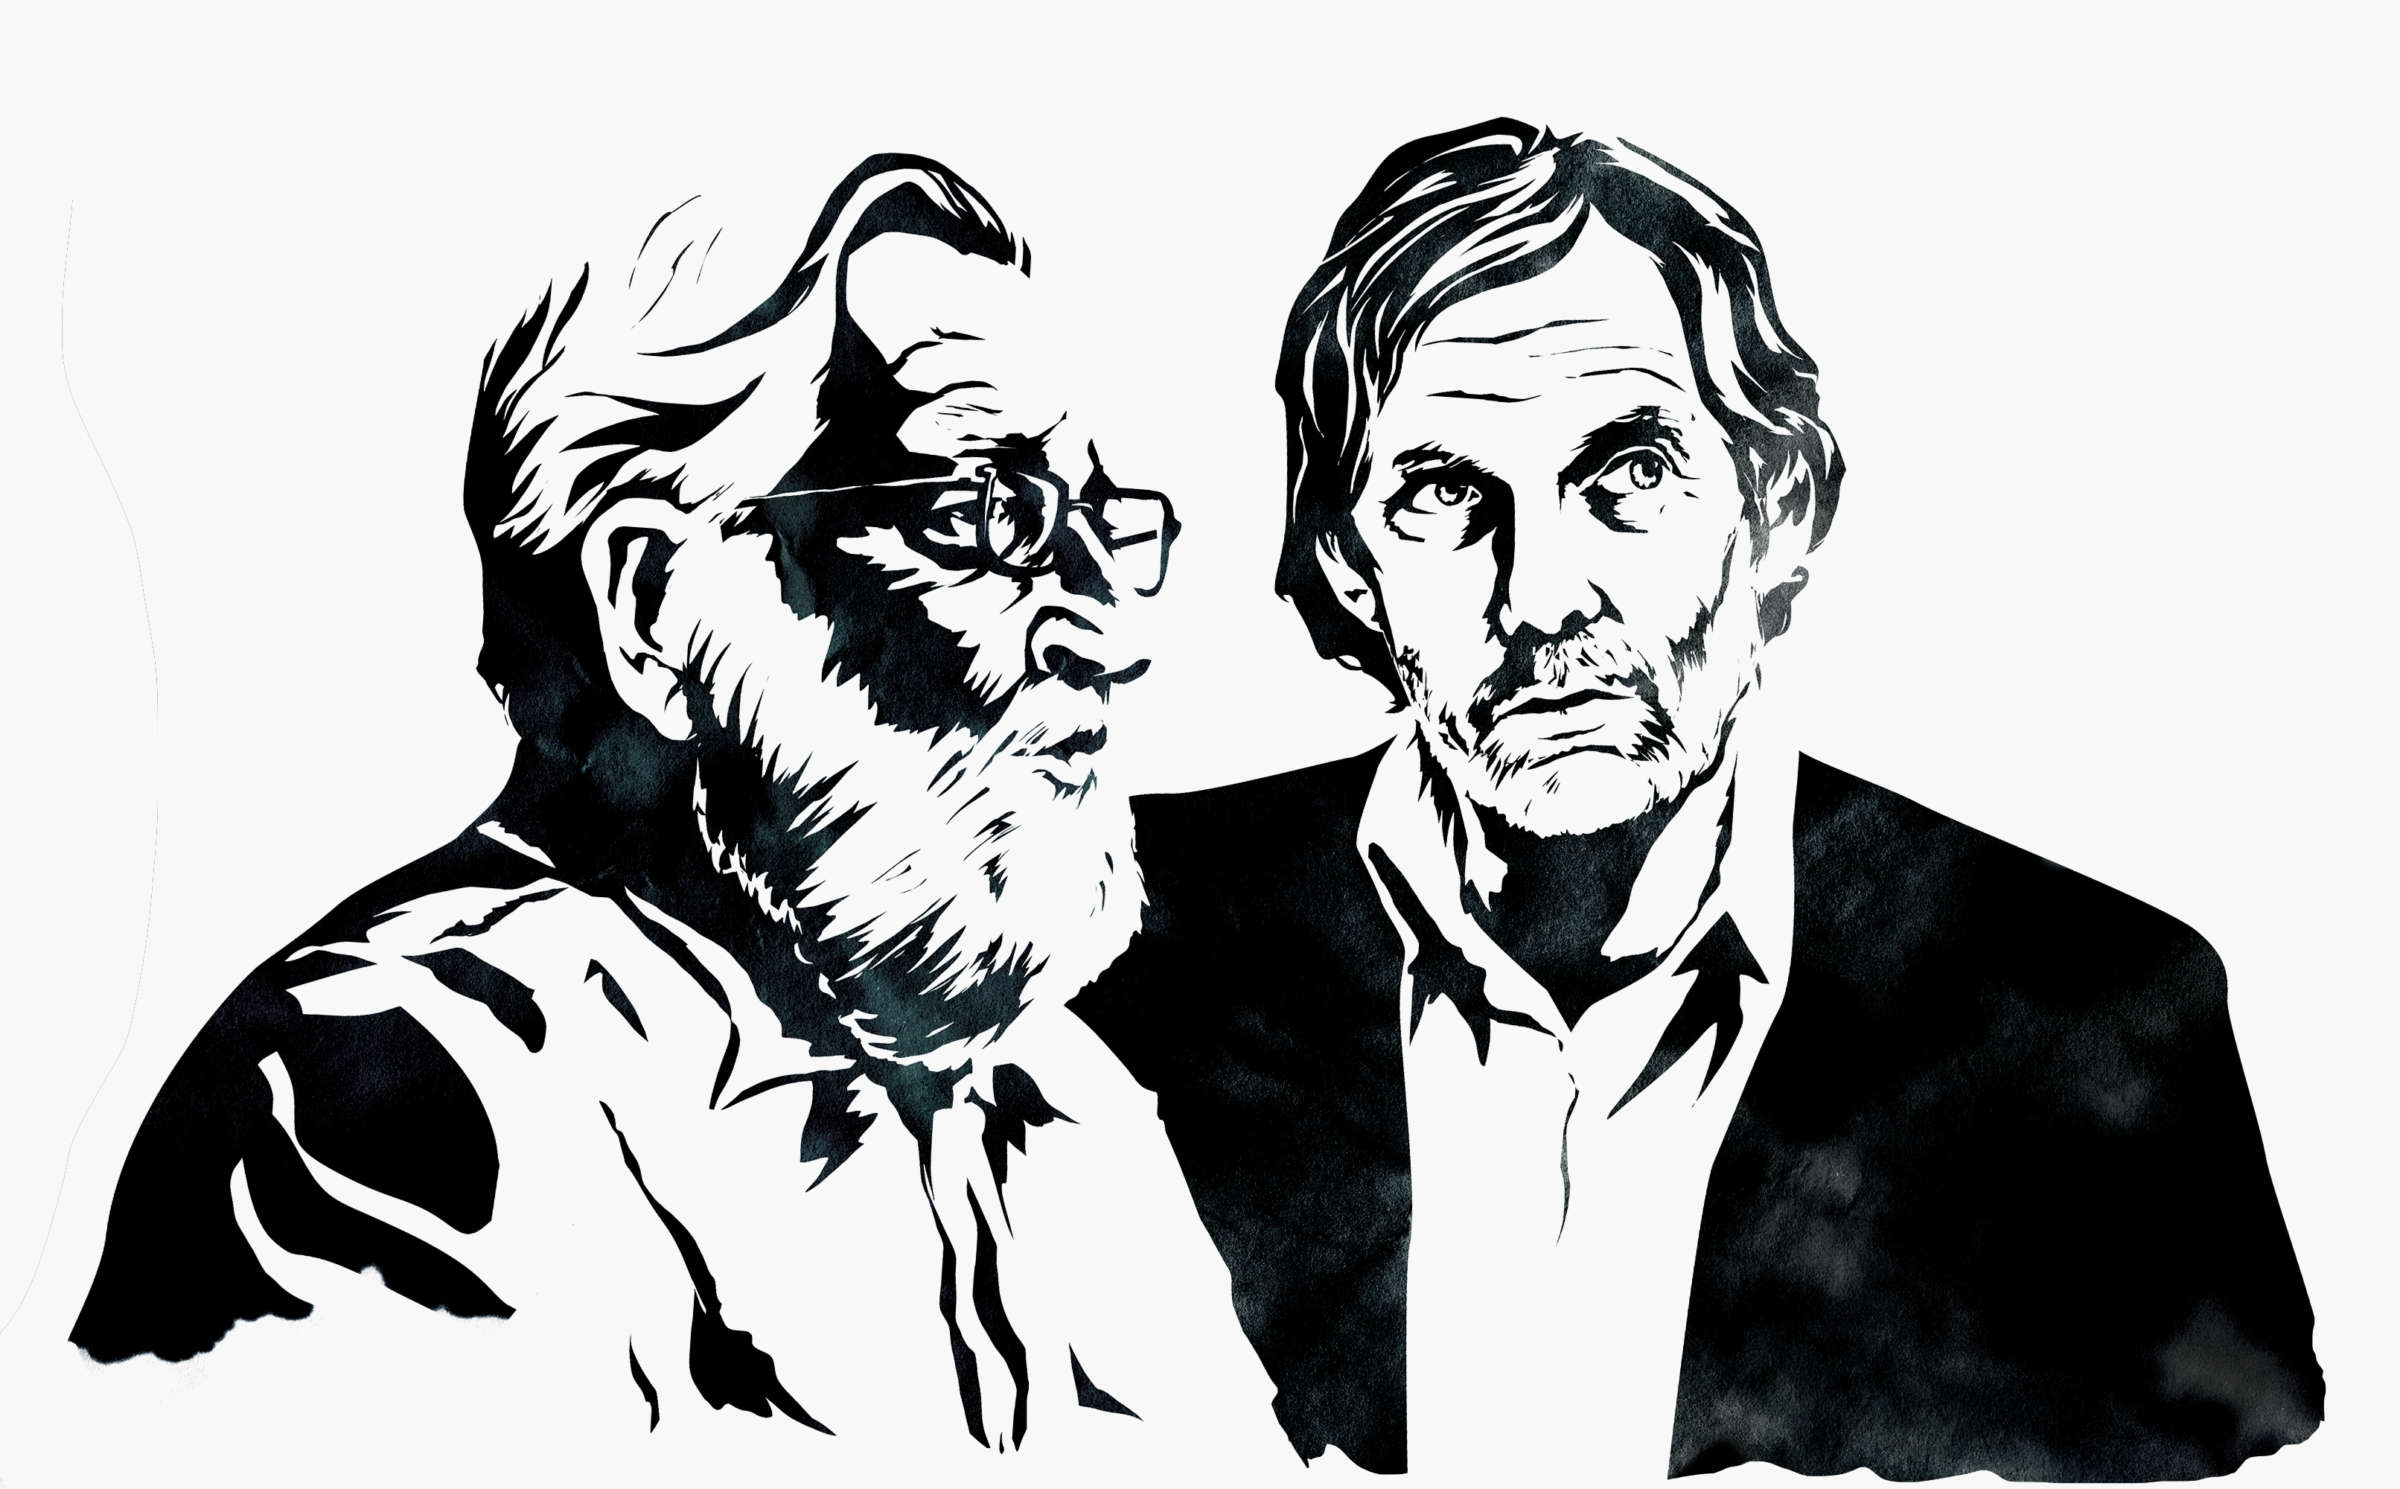 Chomsky and Pollin: To Heal From COVID-19, We Must Imagine a Different World